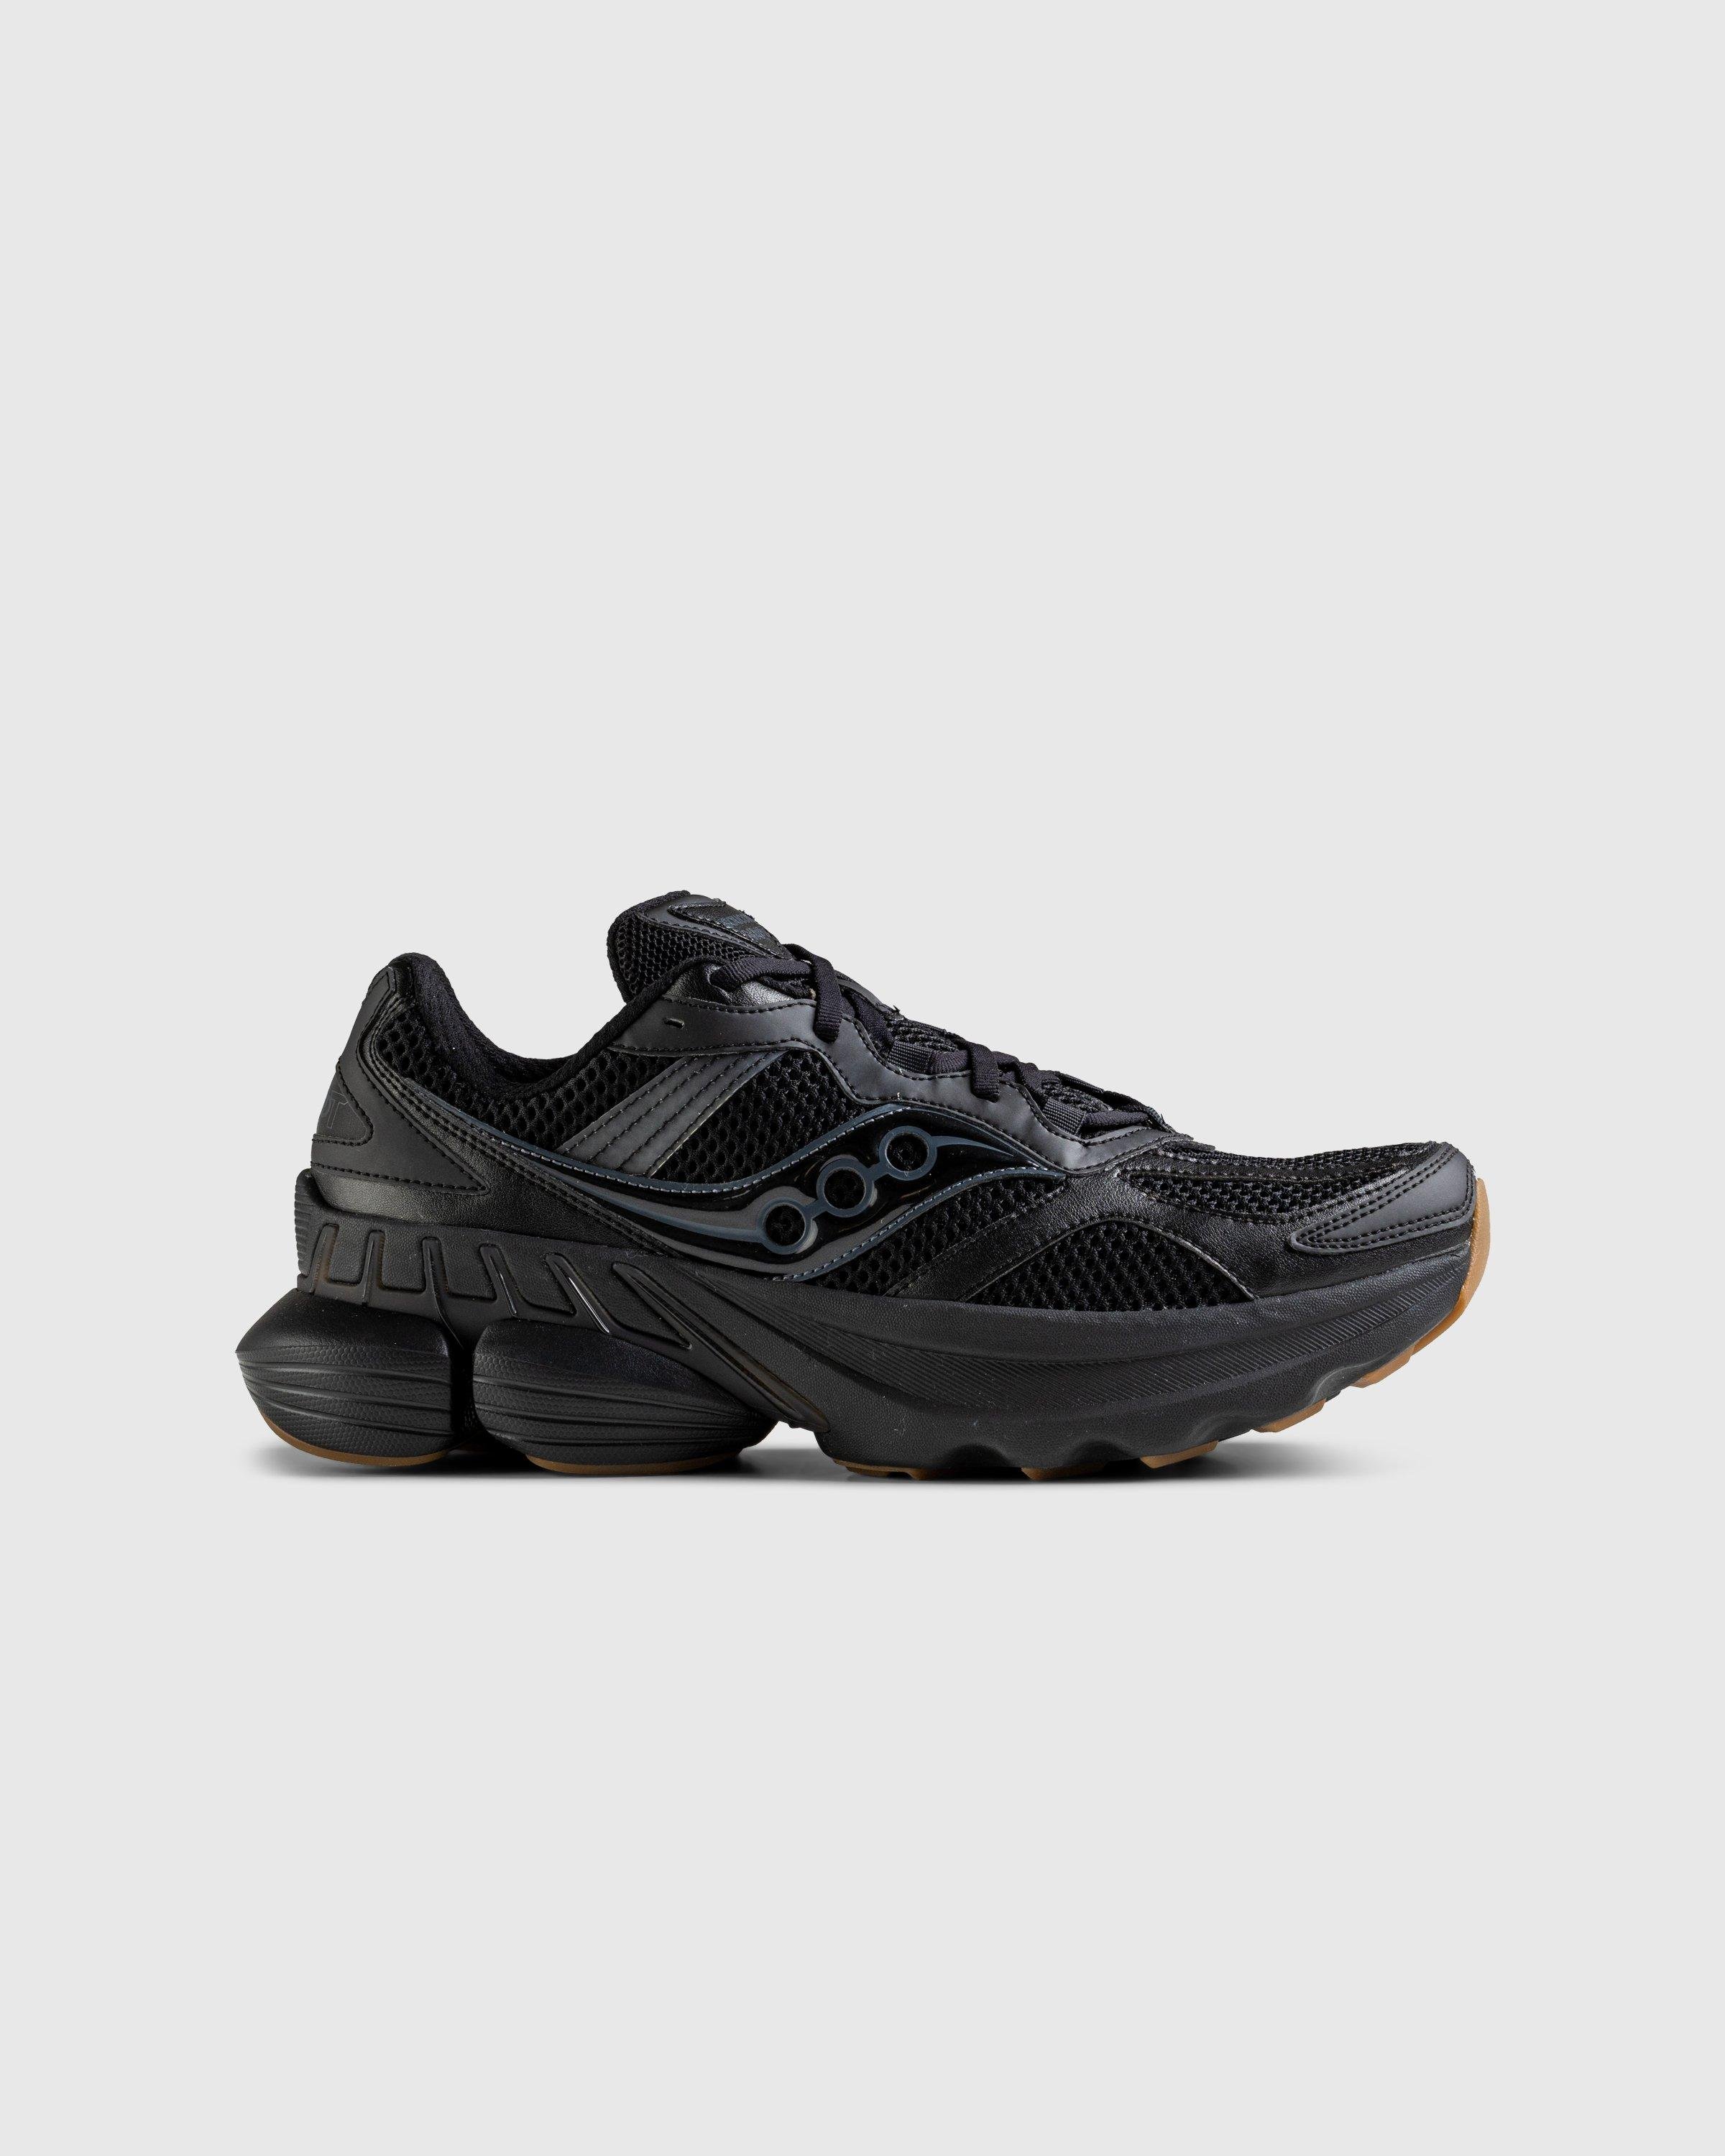 SauconyGrid NXT Black by HIGHSNOBIETY